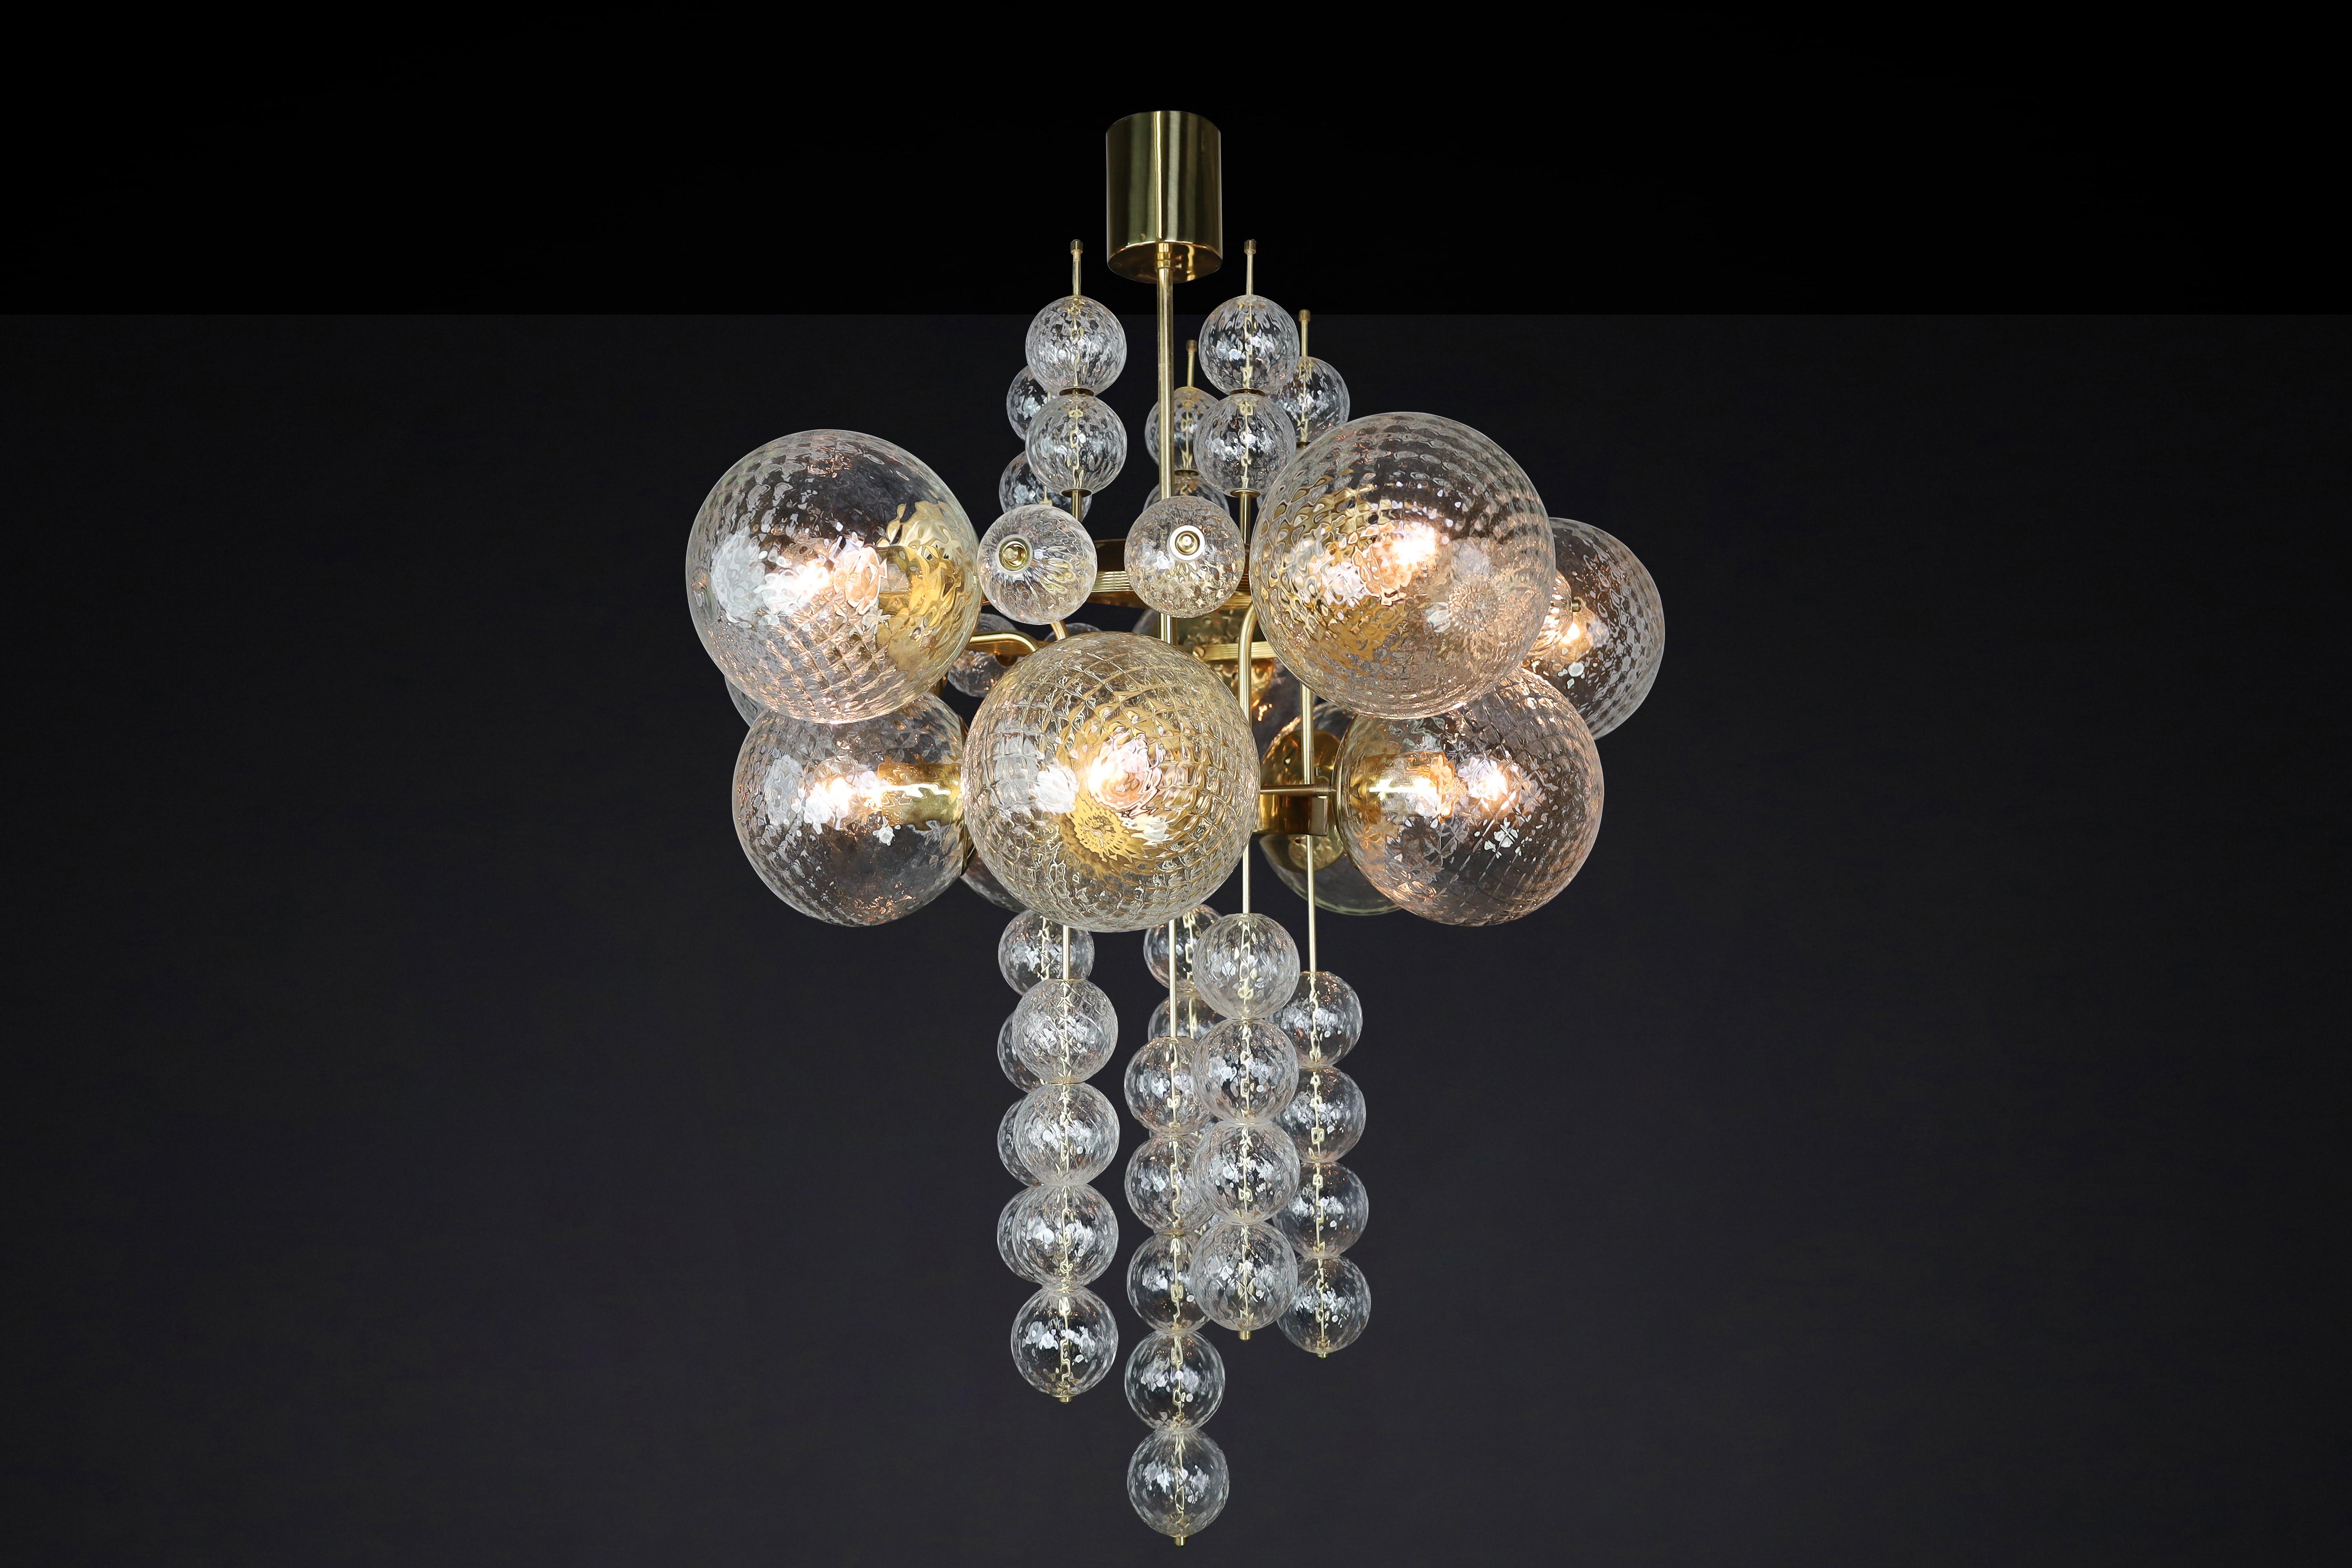 Large Chandelier with brass fixture and hand-blowed glass globes by Preciosa Cz. For Sale 3